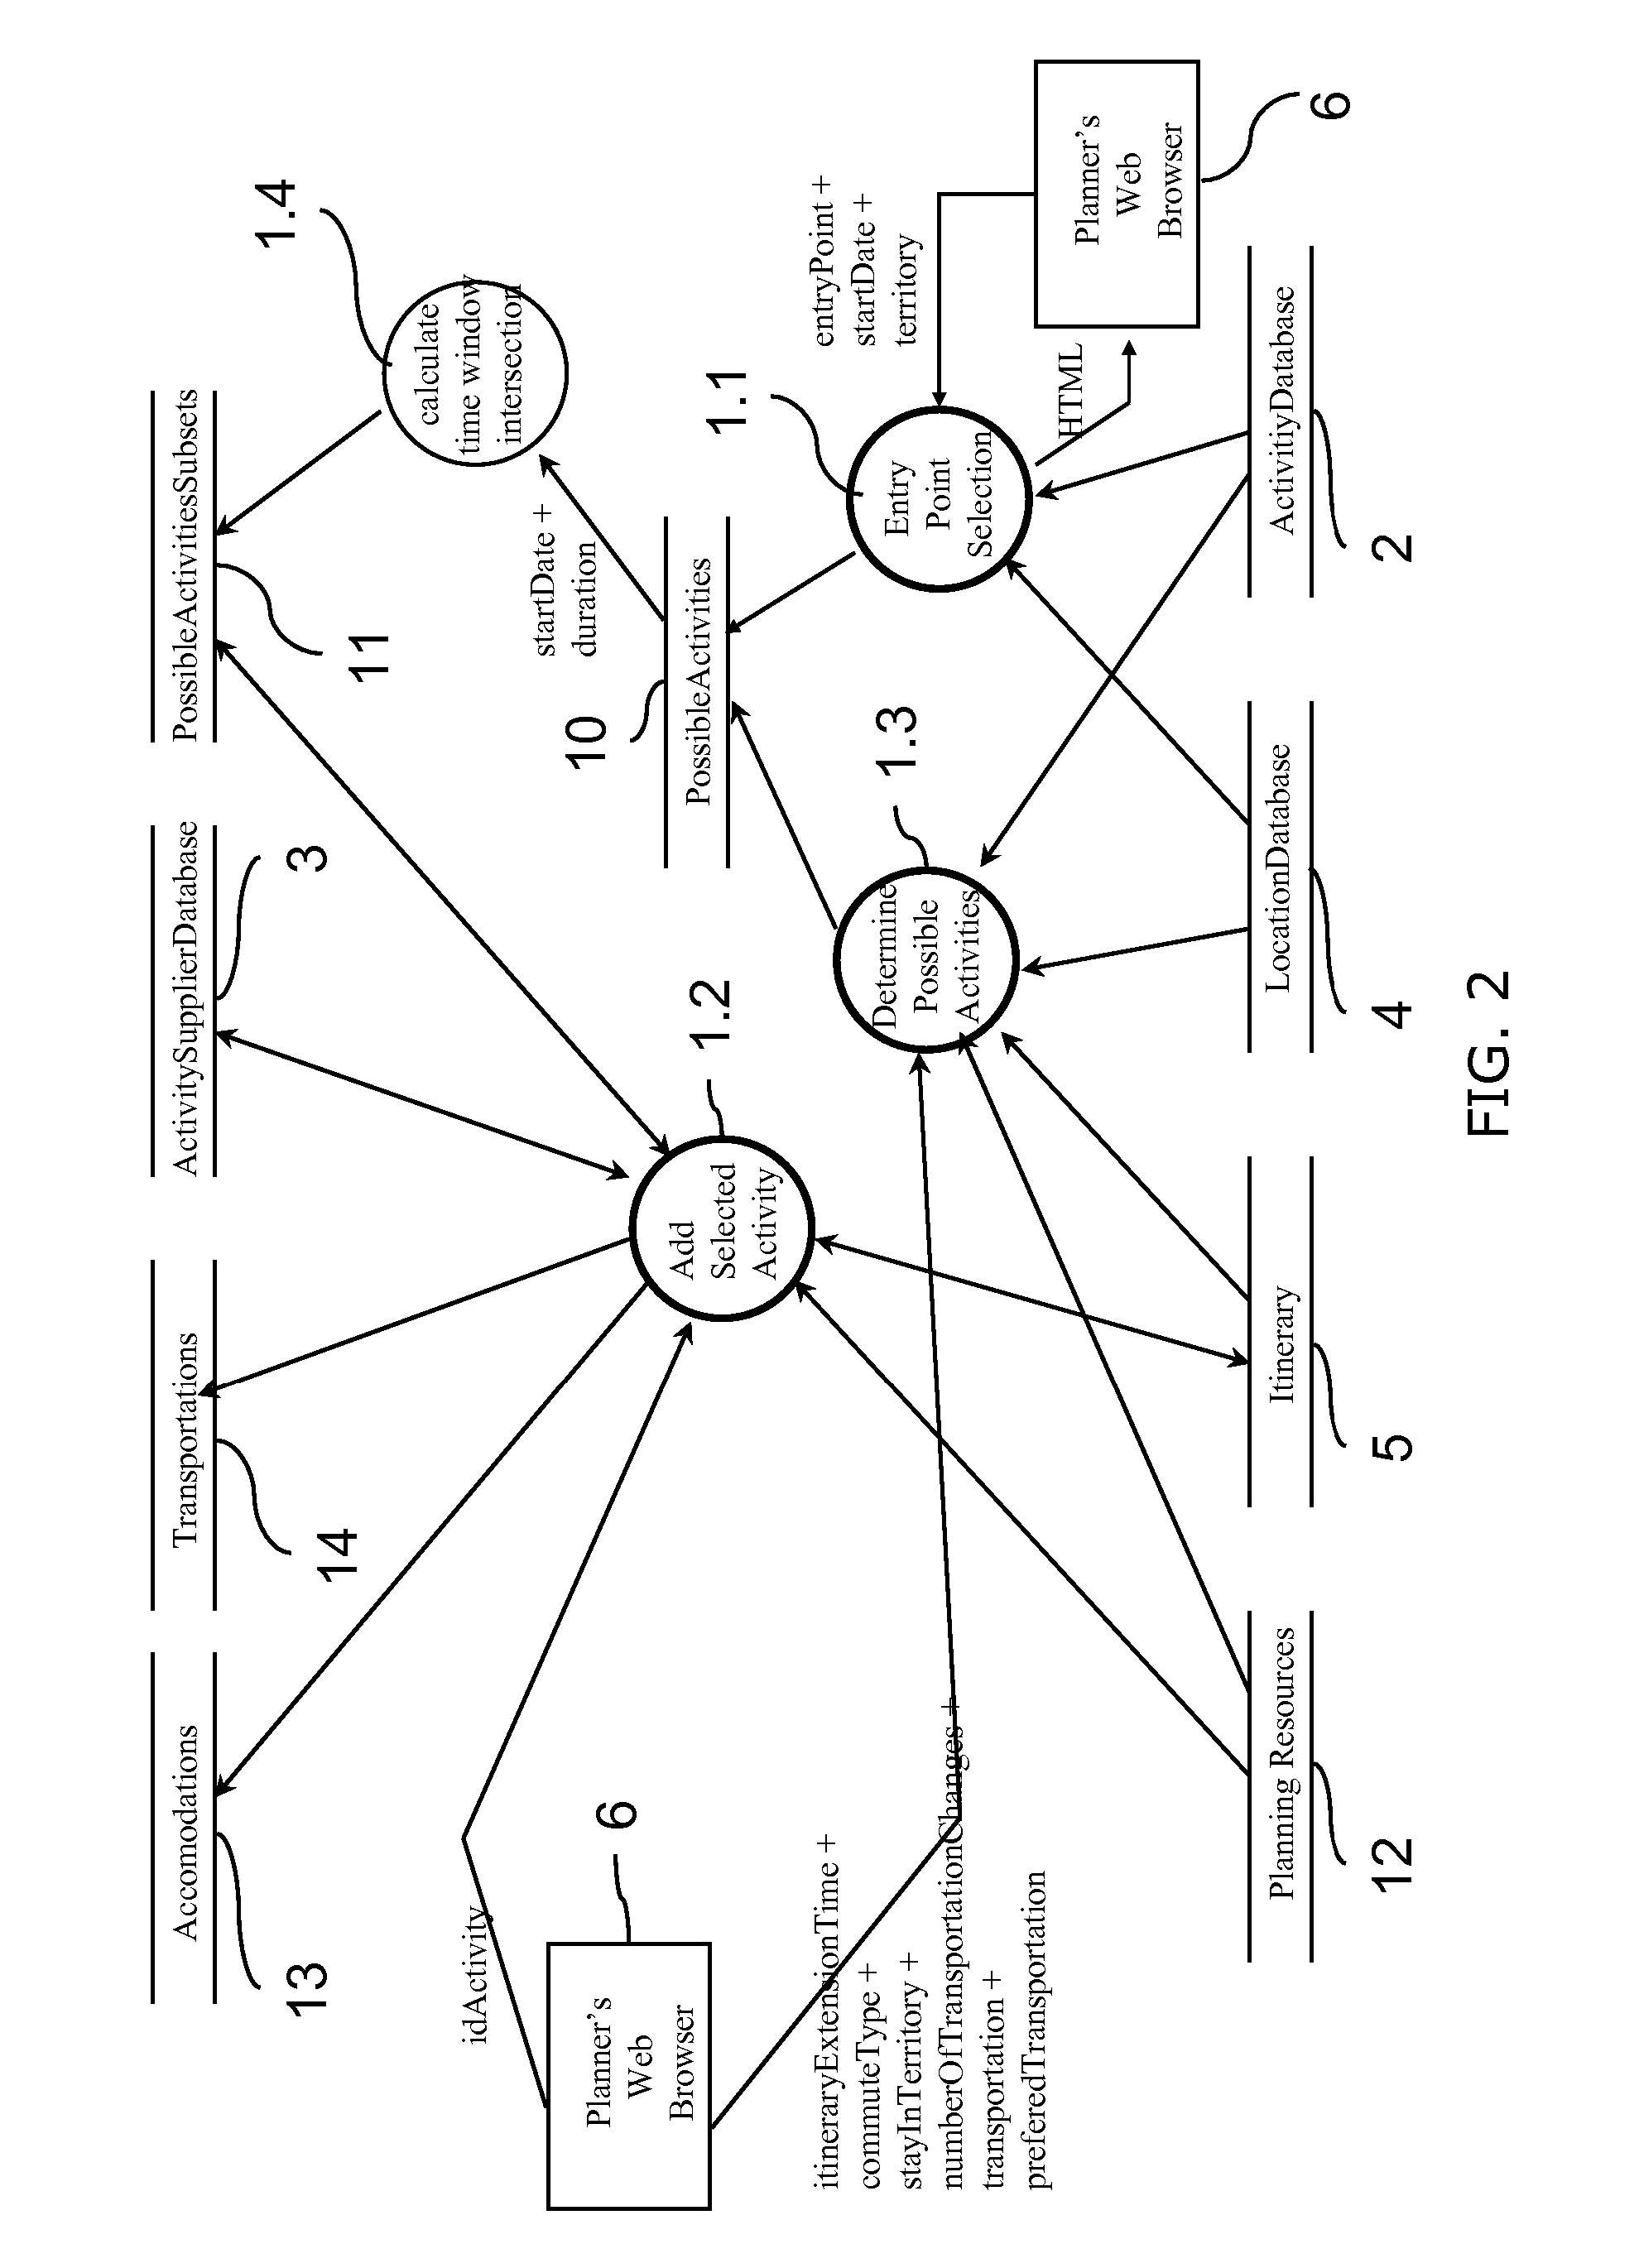 Itinerary planning tool, system, method, software, and hardware